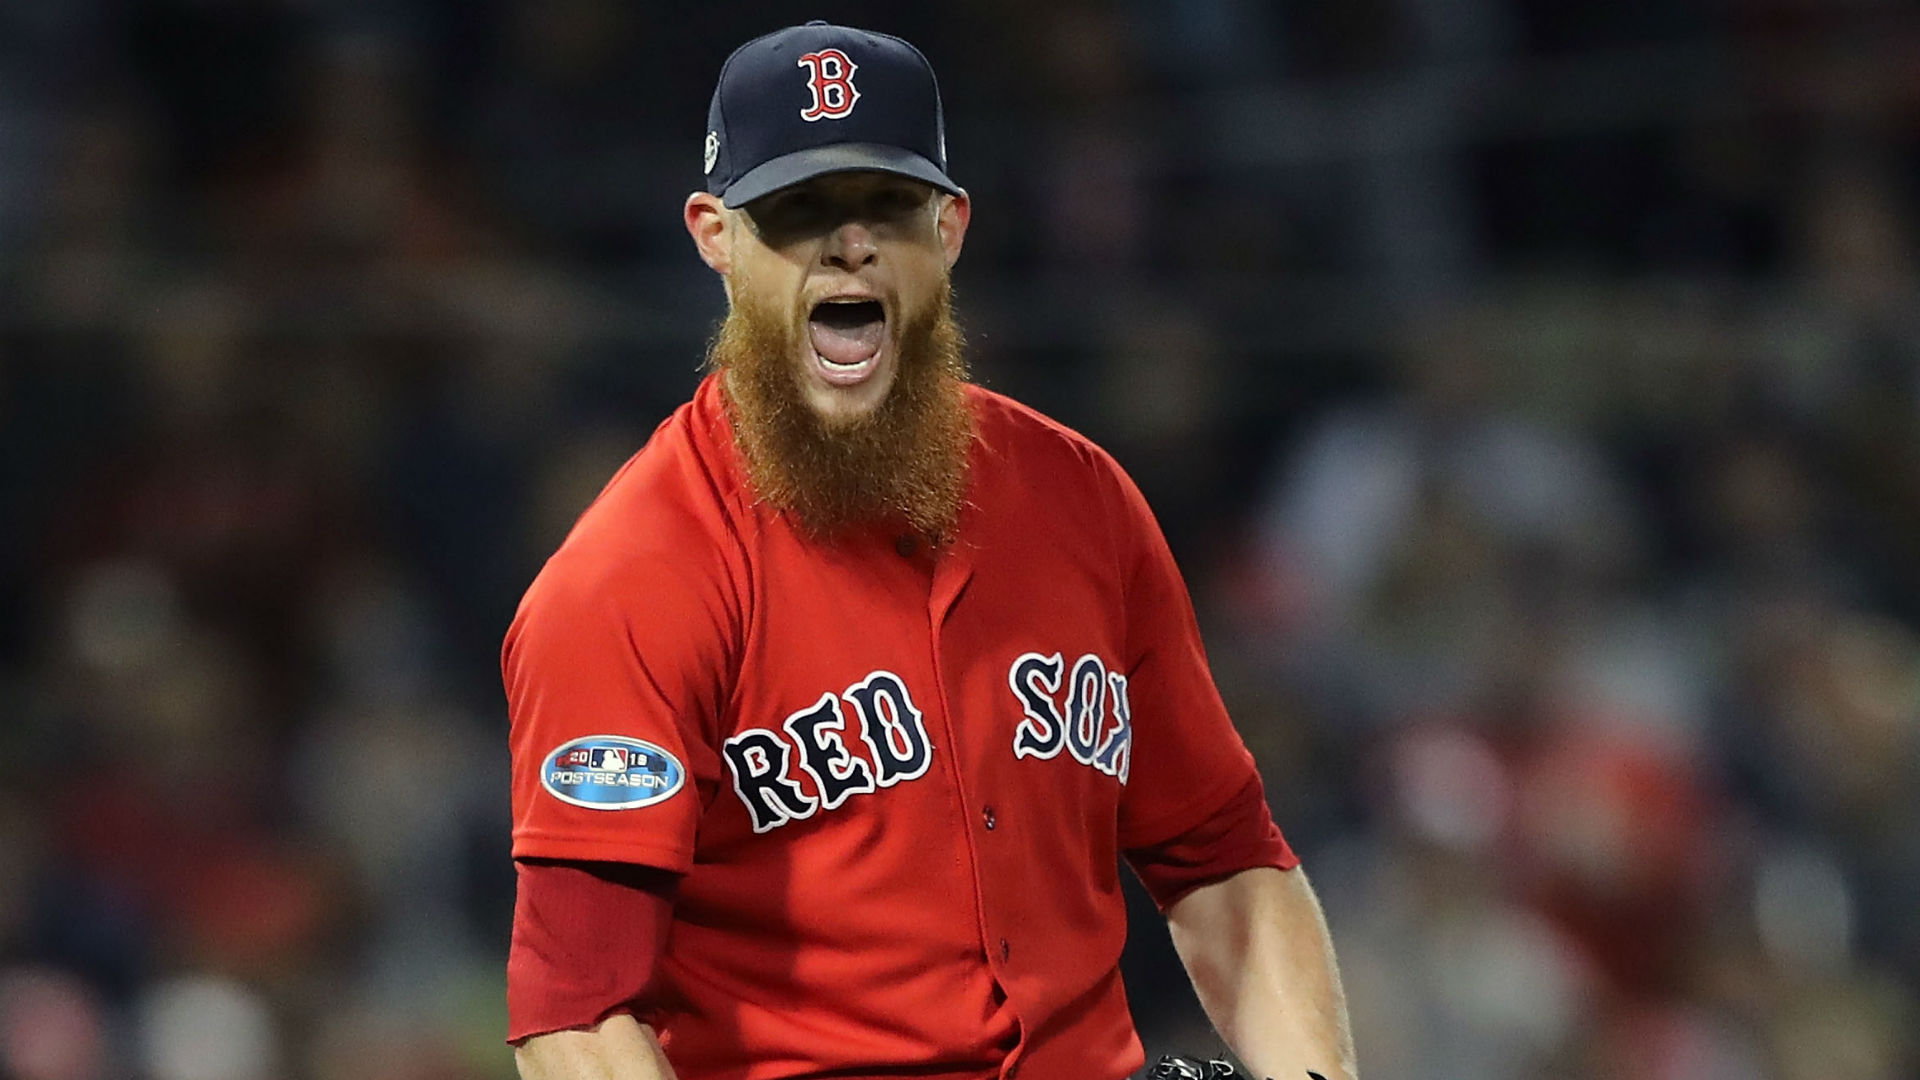 Kimbrel doesn't just want a six-year deal, he wants a record-breaking contract.